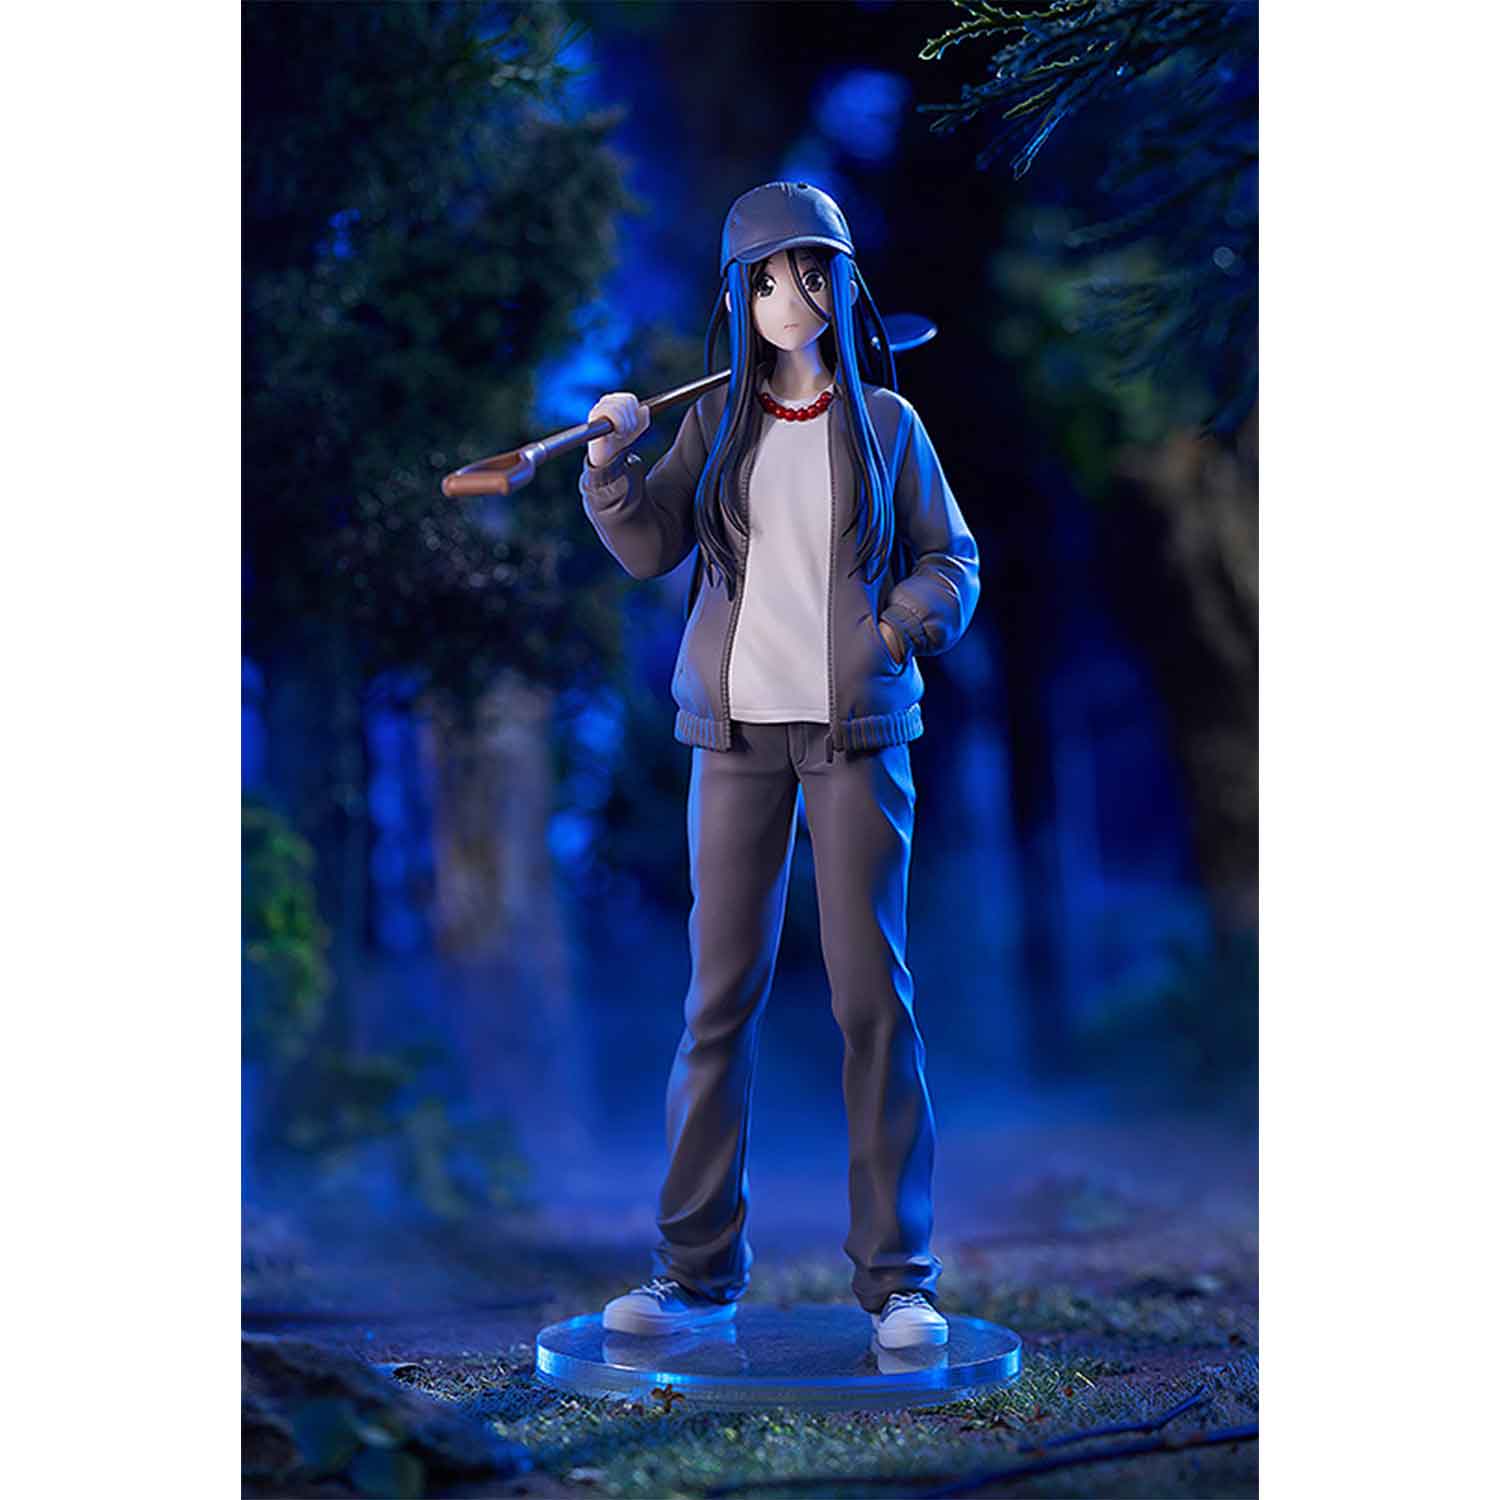 Erased Anime Action Figures, Stand Figure Model